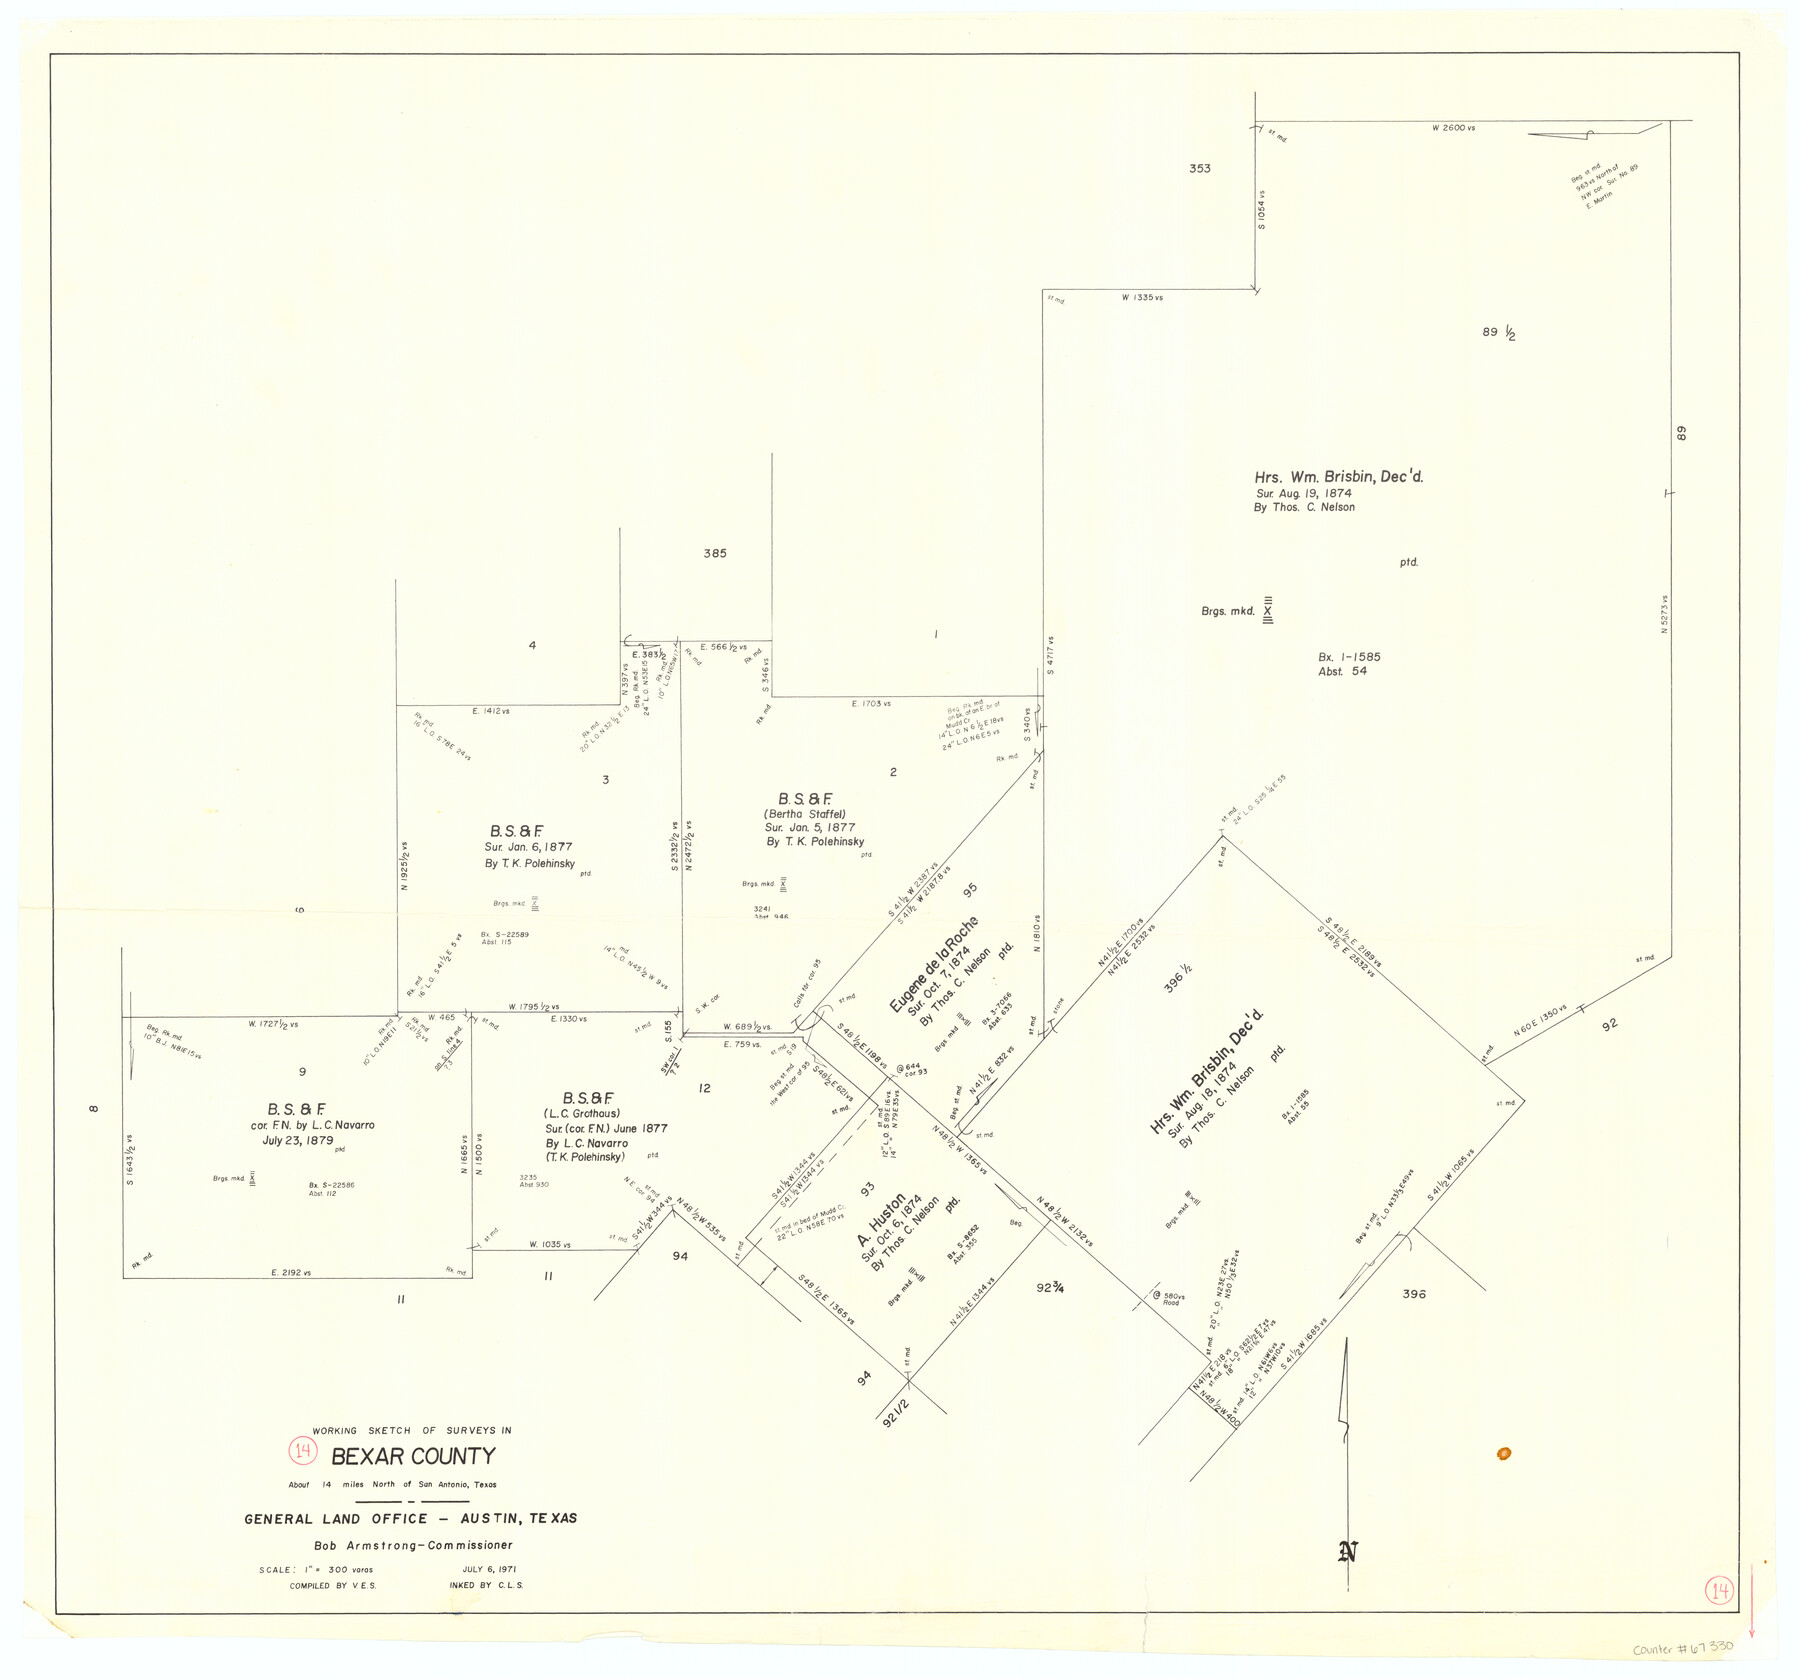 67330, Bexar County Working Sketch 14, General Map Collection